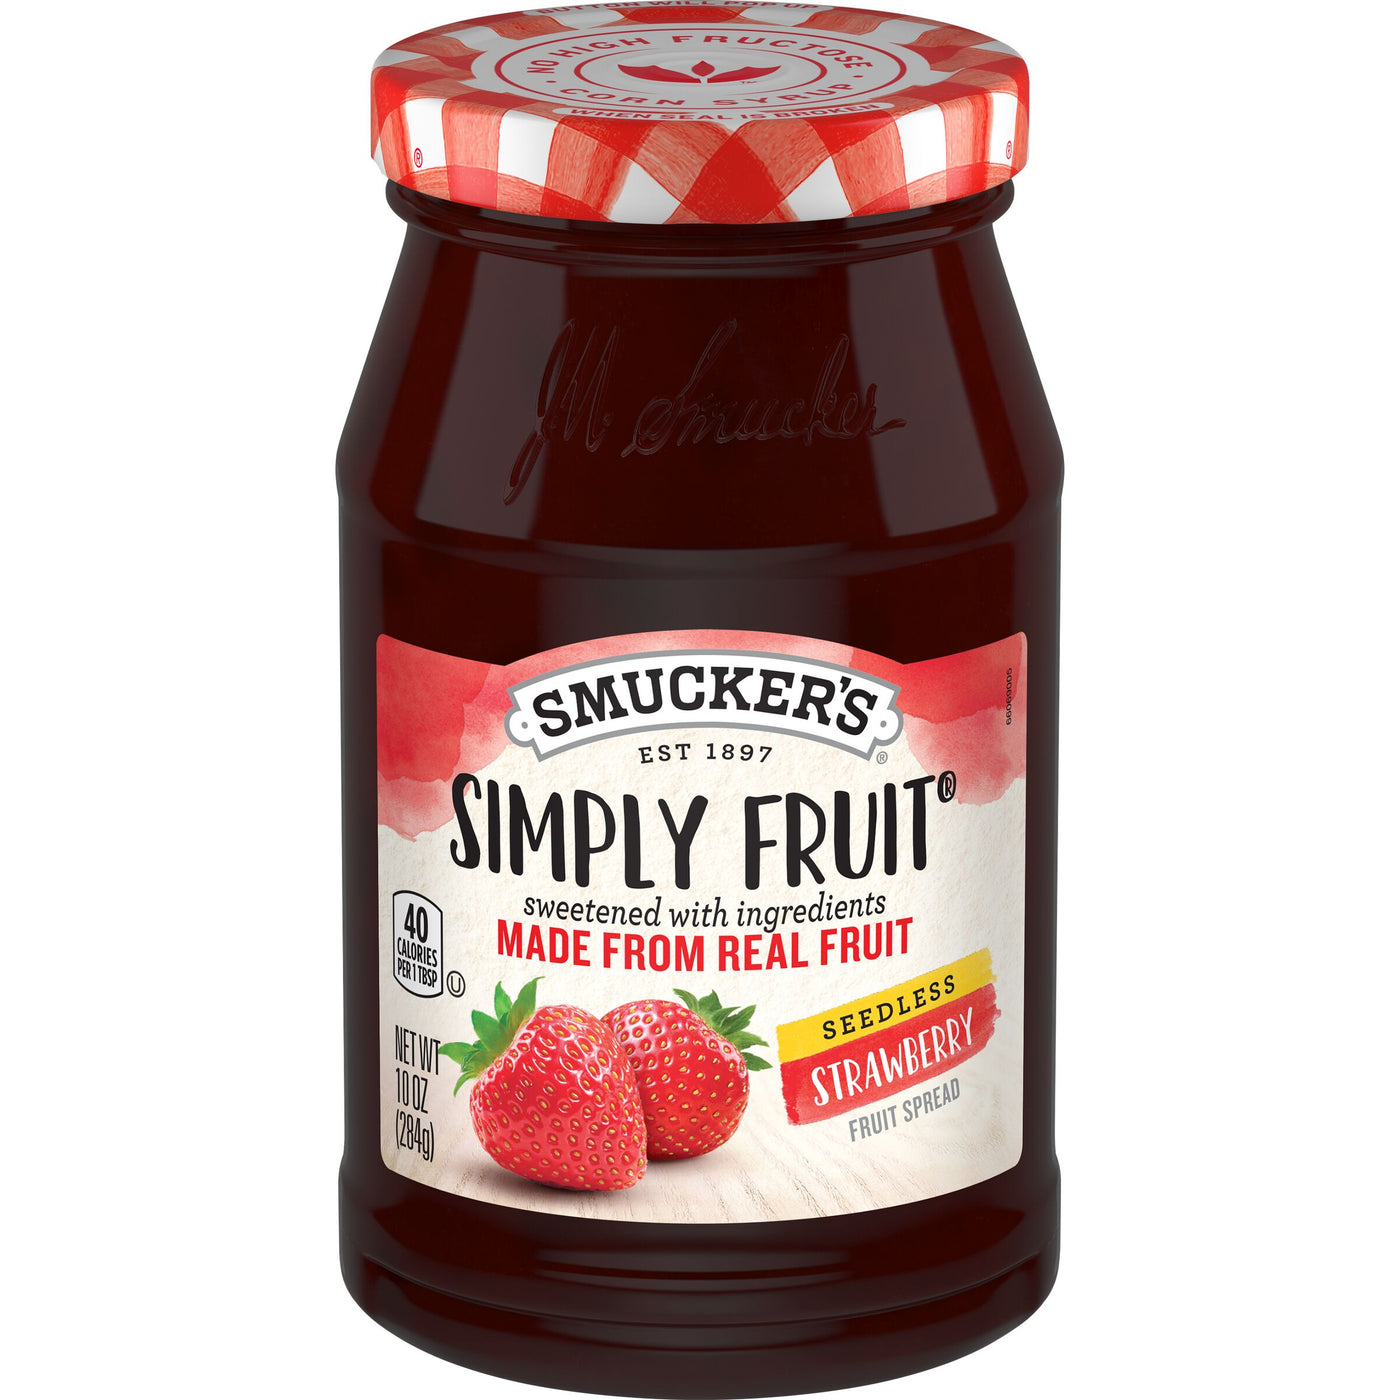 Smucker's Simply Fruit Seedless Strawberry Fruit Spread, 10 oz